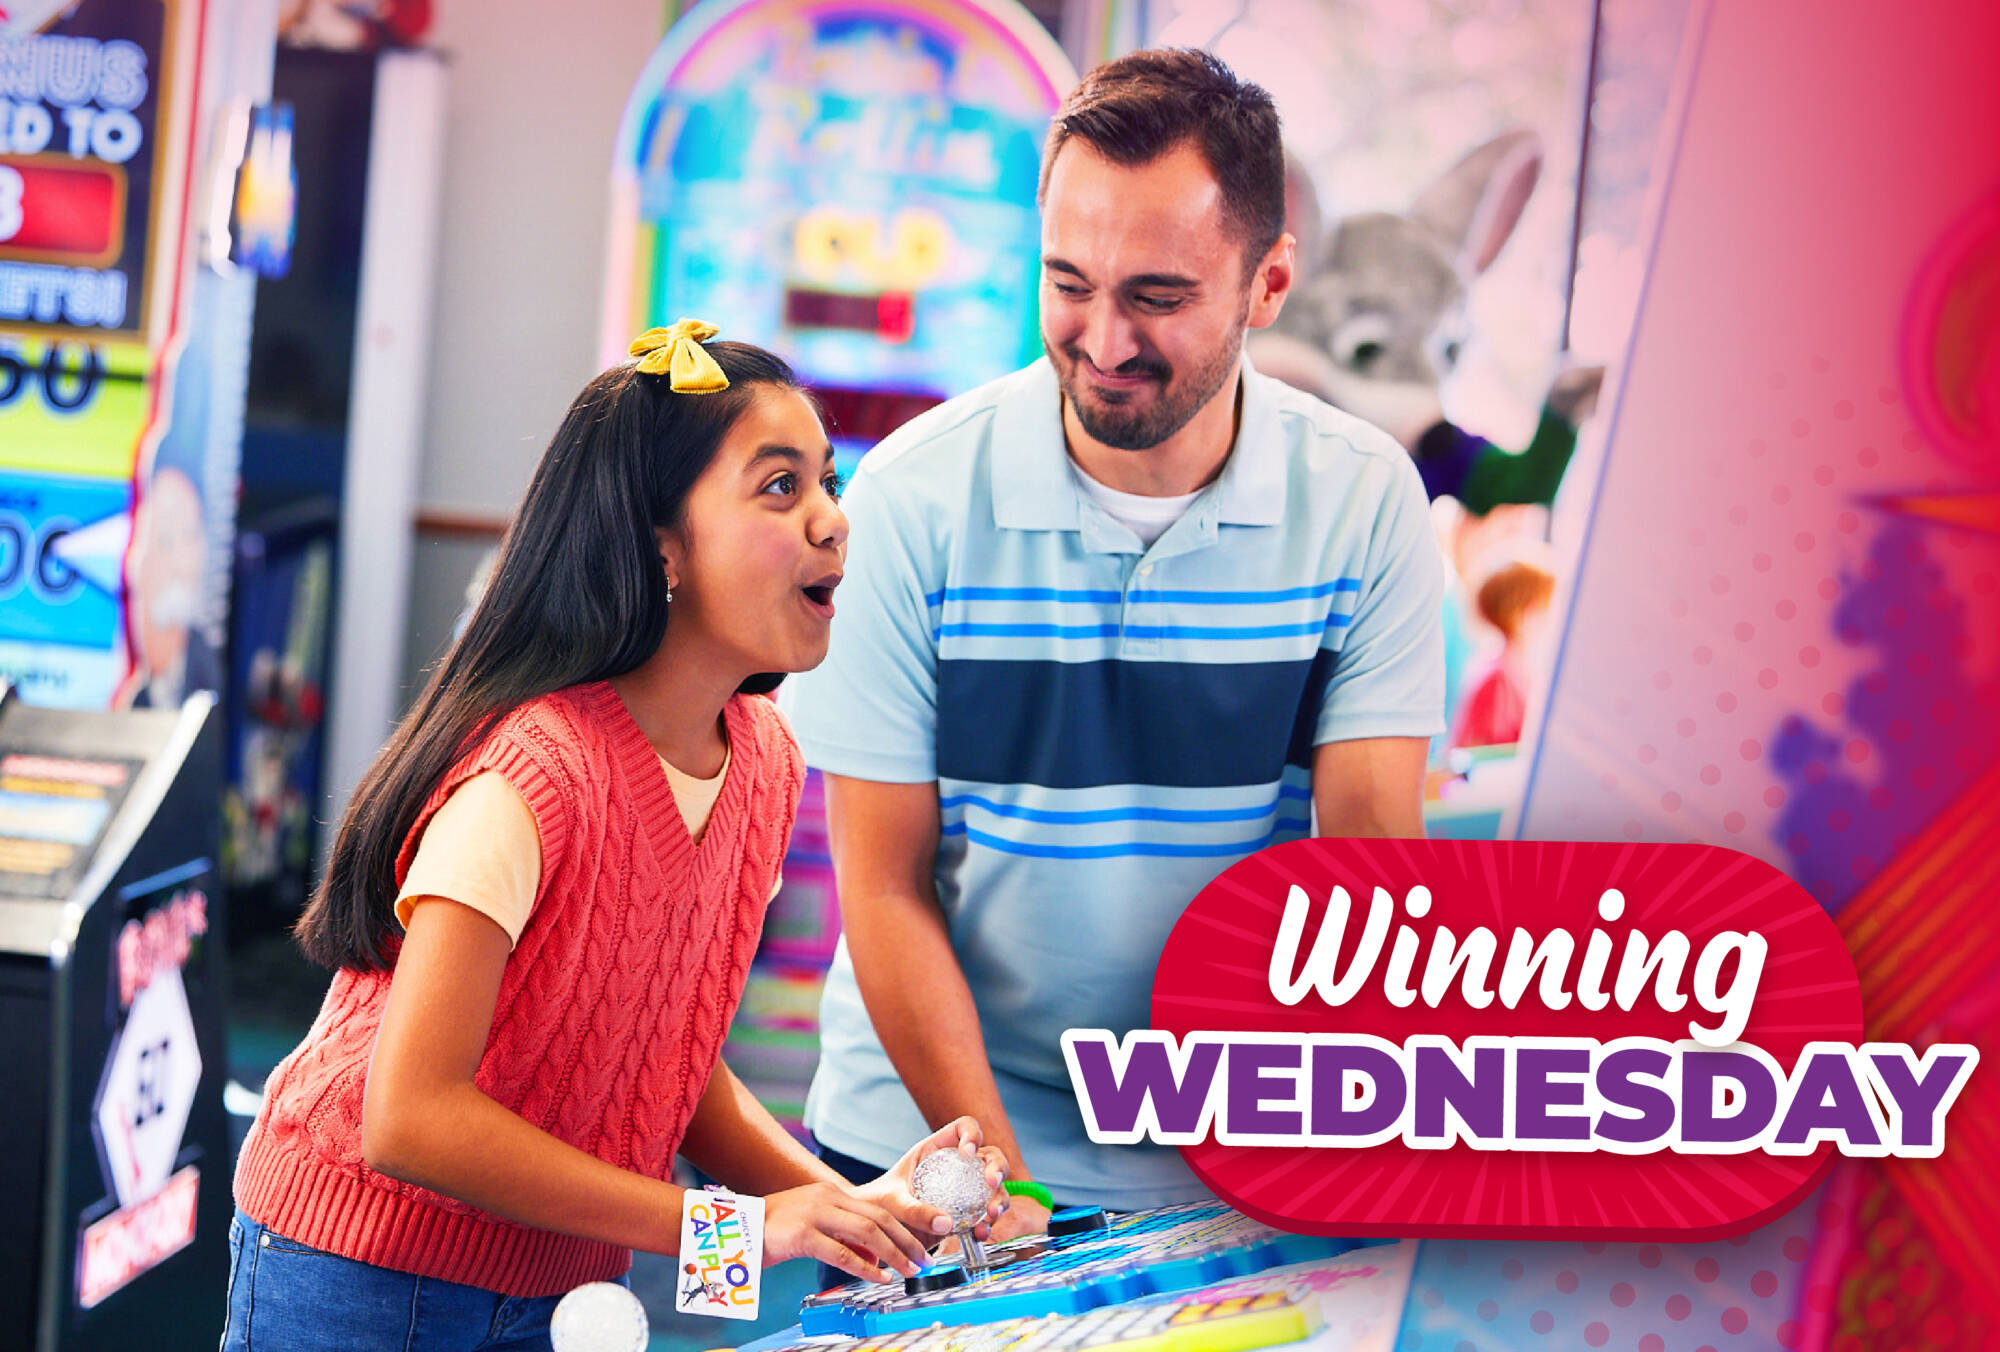 "Winning Wednesday" Father and daughter playing a game